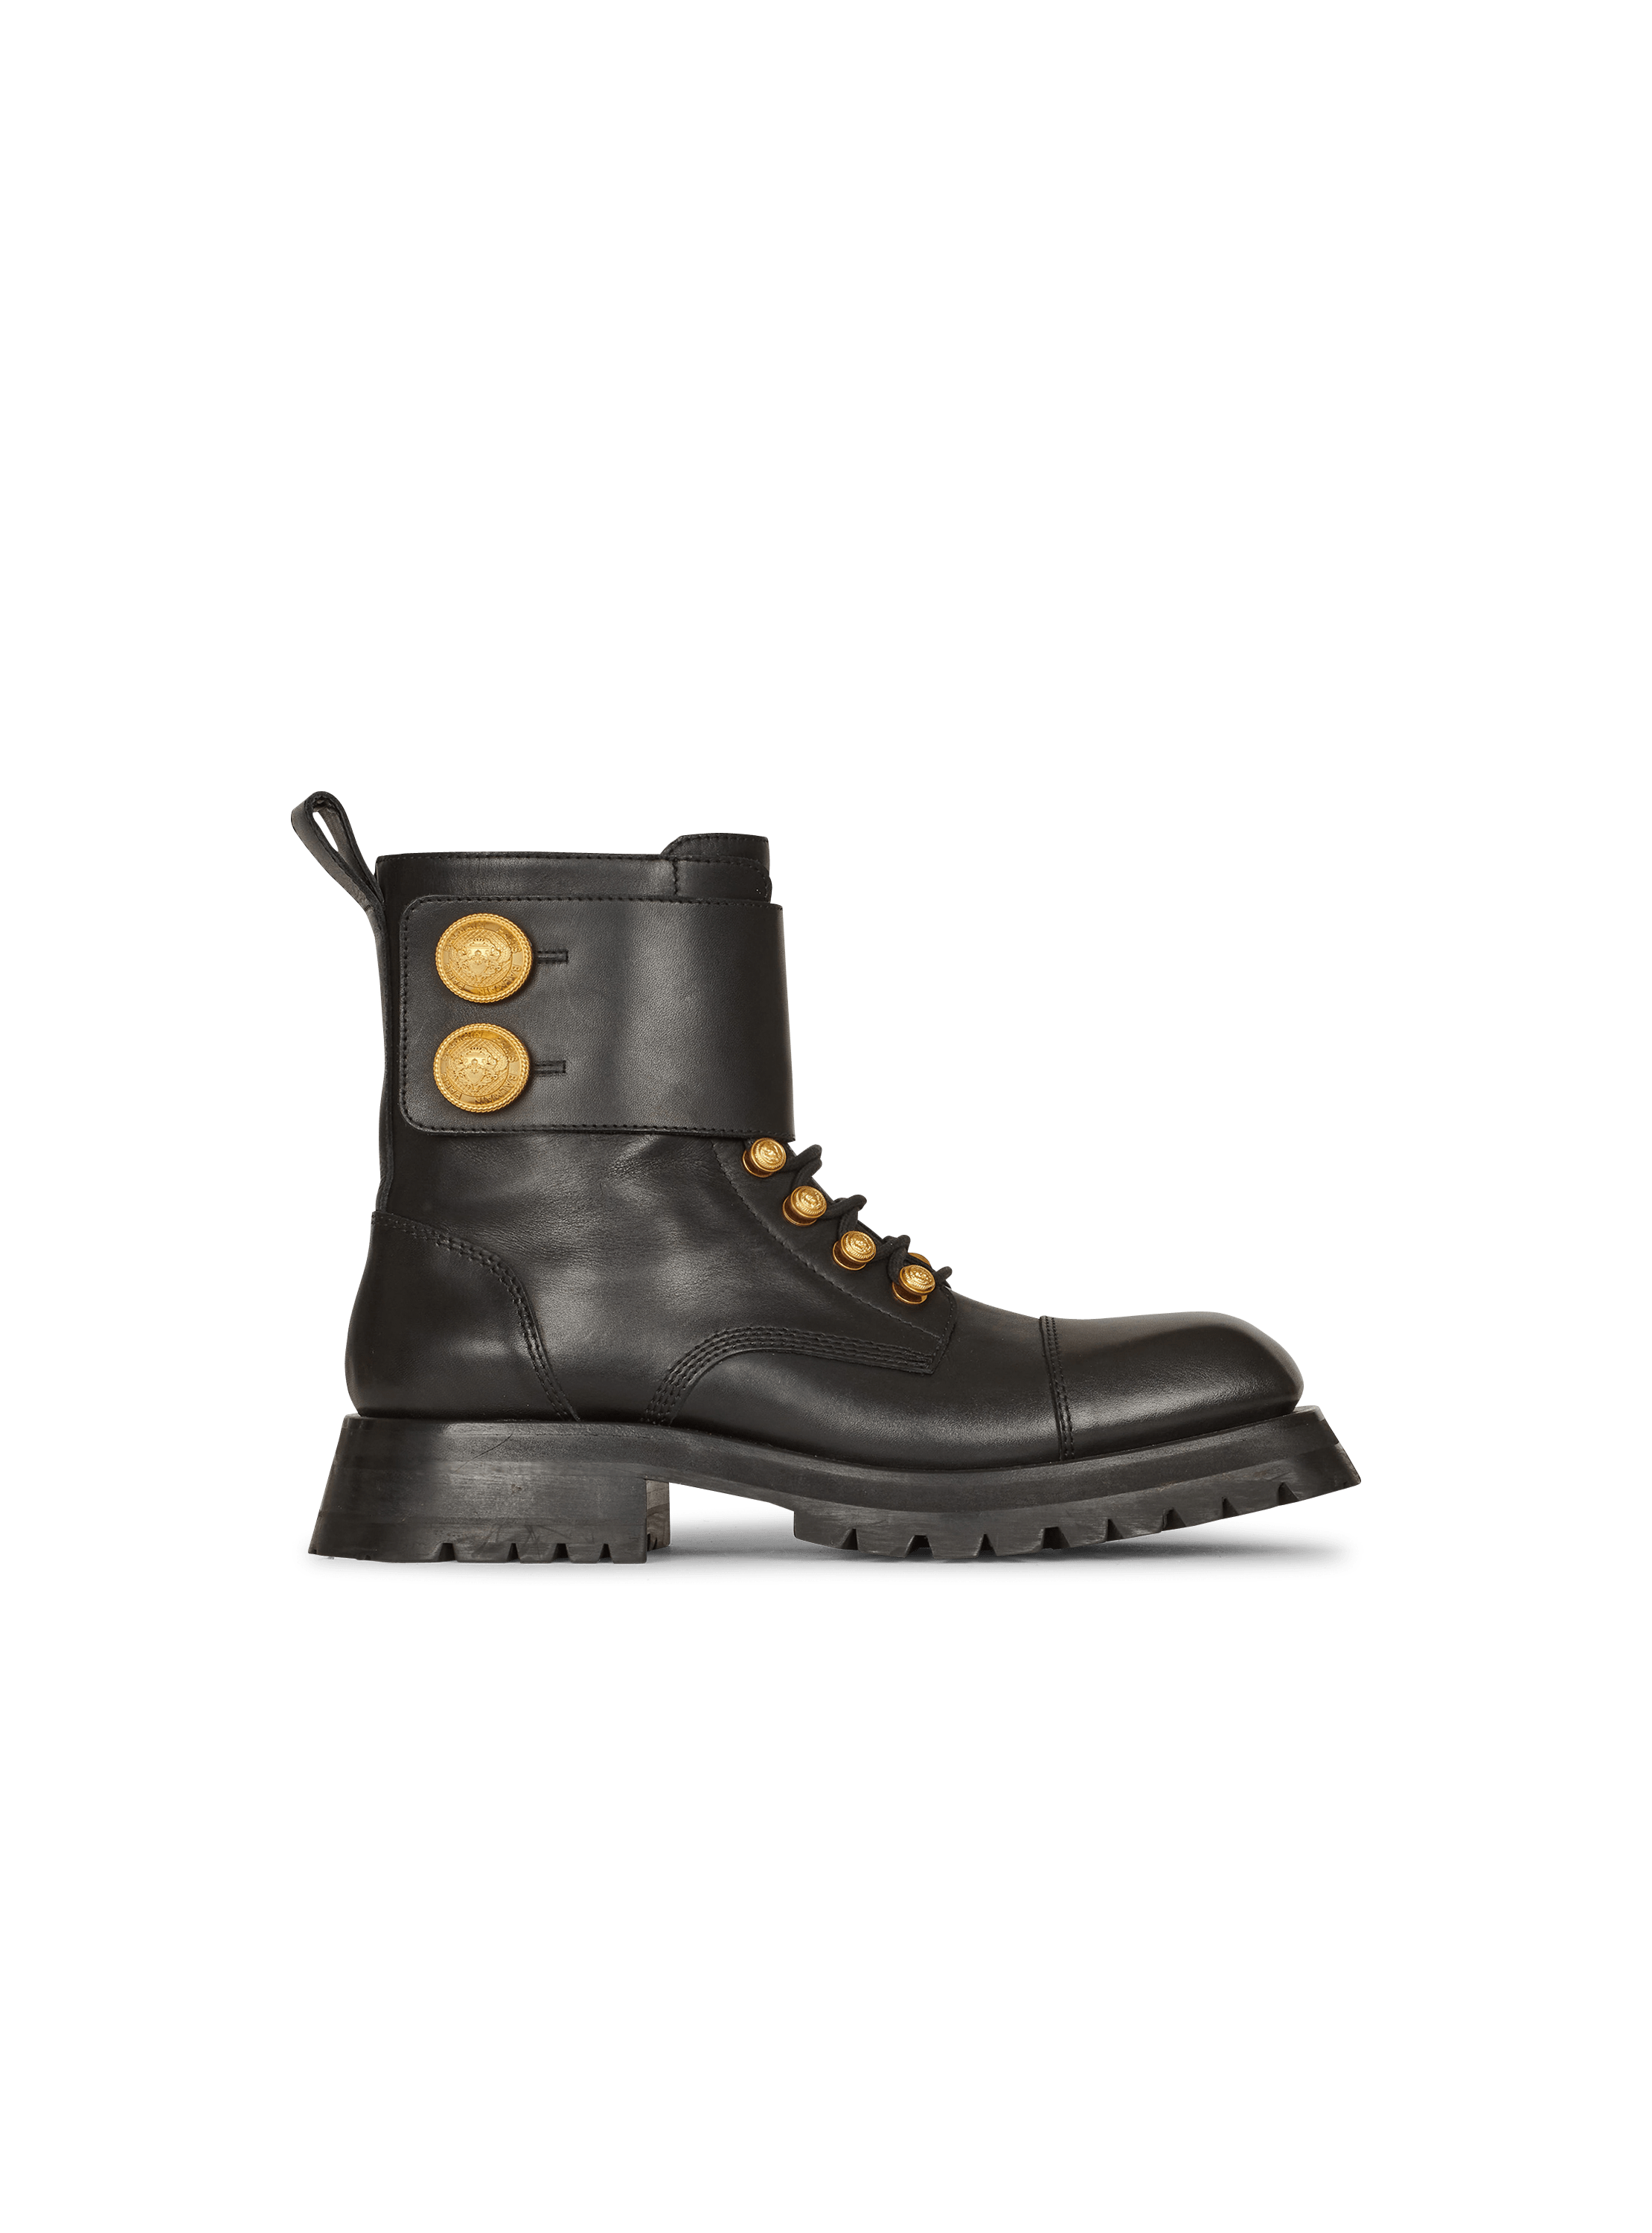 Ranger Army leather ankle boots, black, hi-res